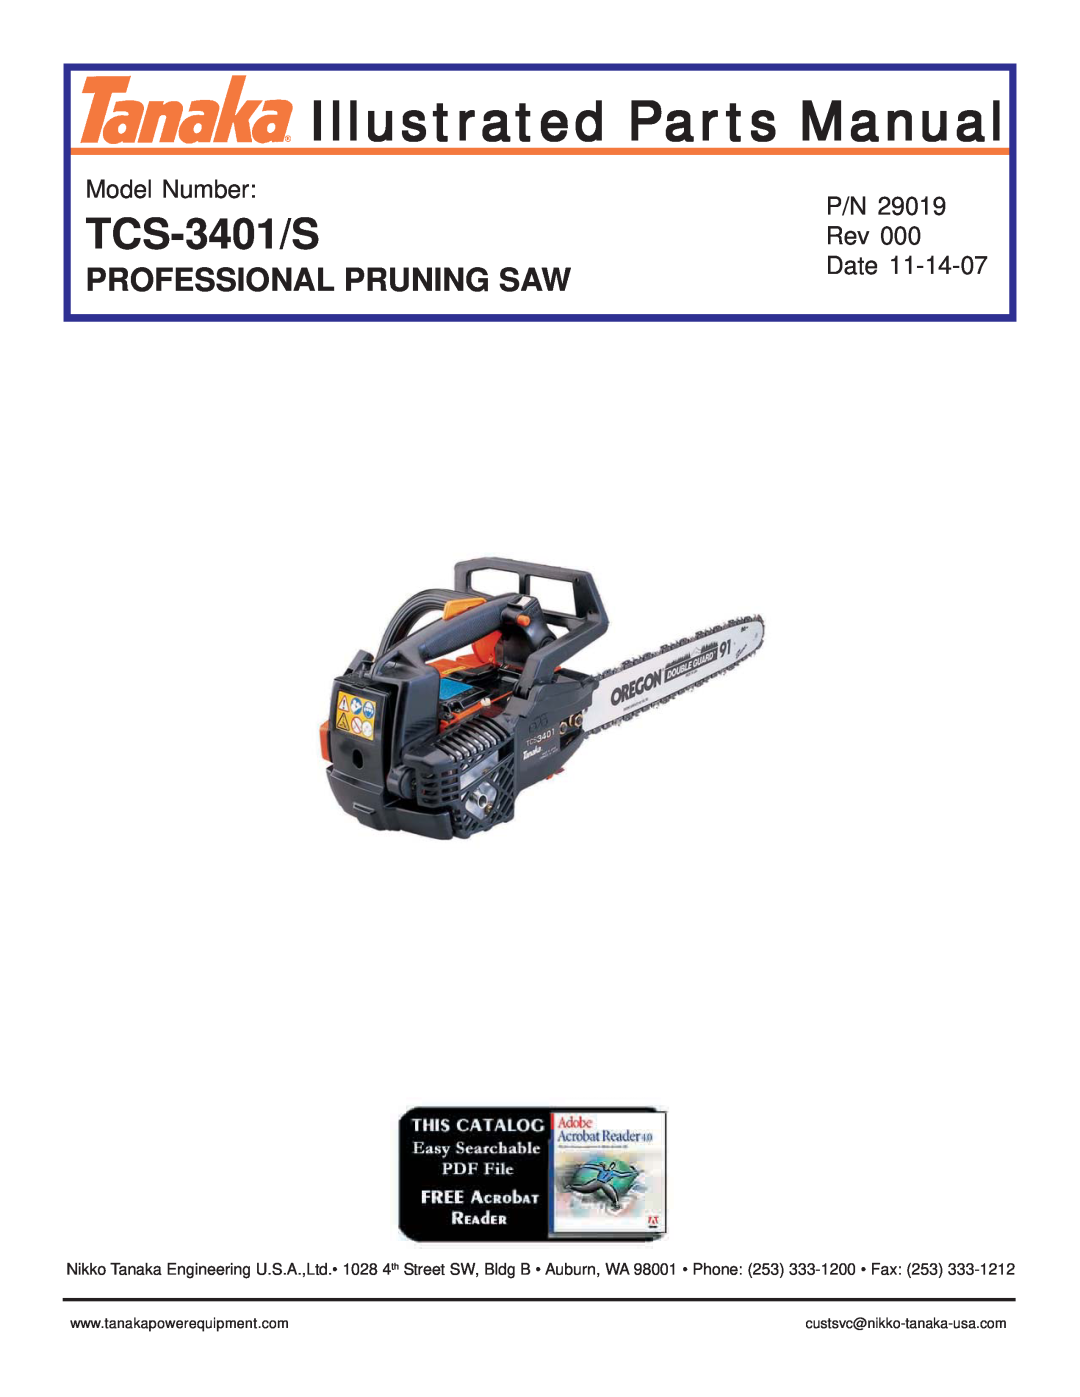 Tanaka TCS-3401/S manual Illustrated Parts Manual, Professional Pruning Saw, Model Number, Date 